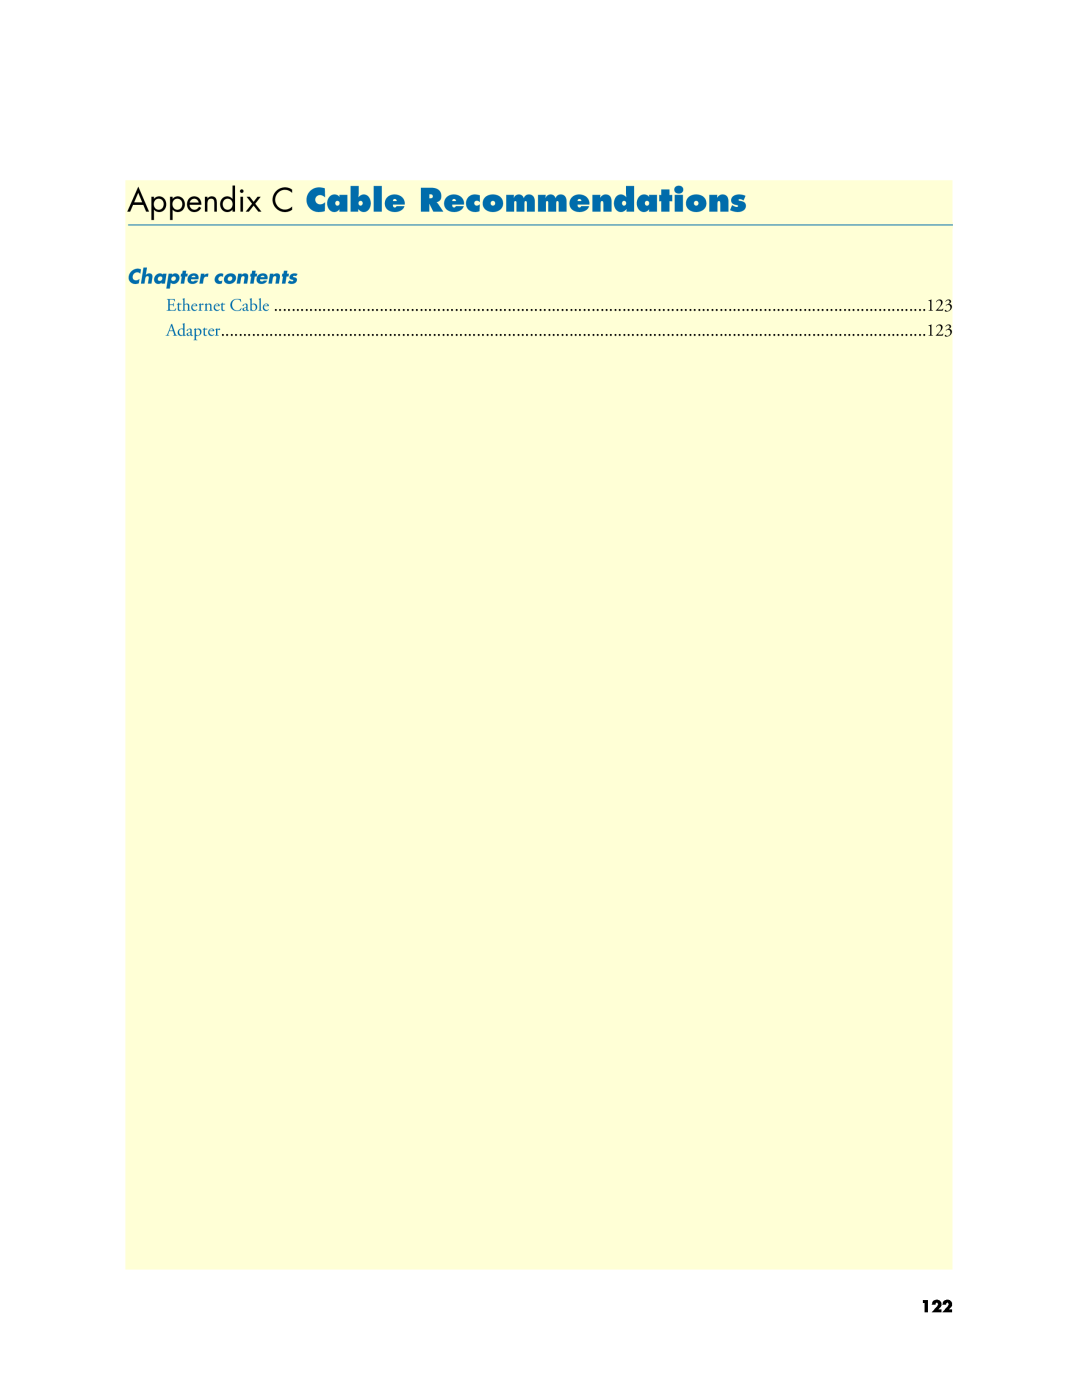 Patton electronic 2621, 2635 manual Appendix C Cable Recommendations, Chapter contents 